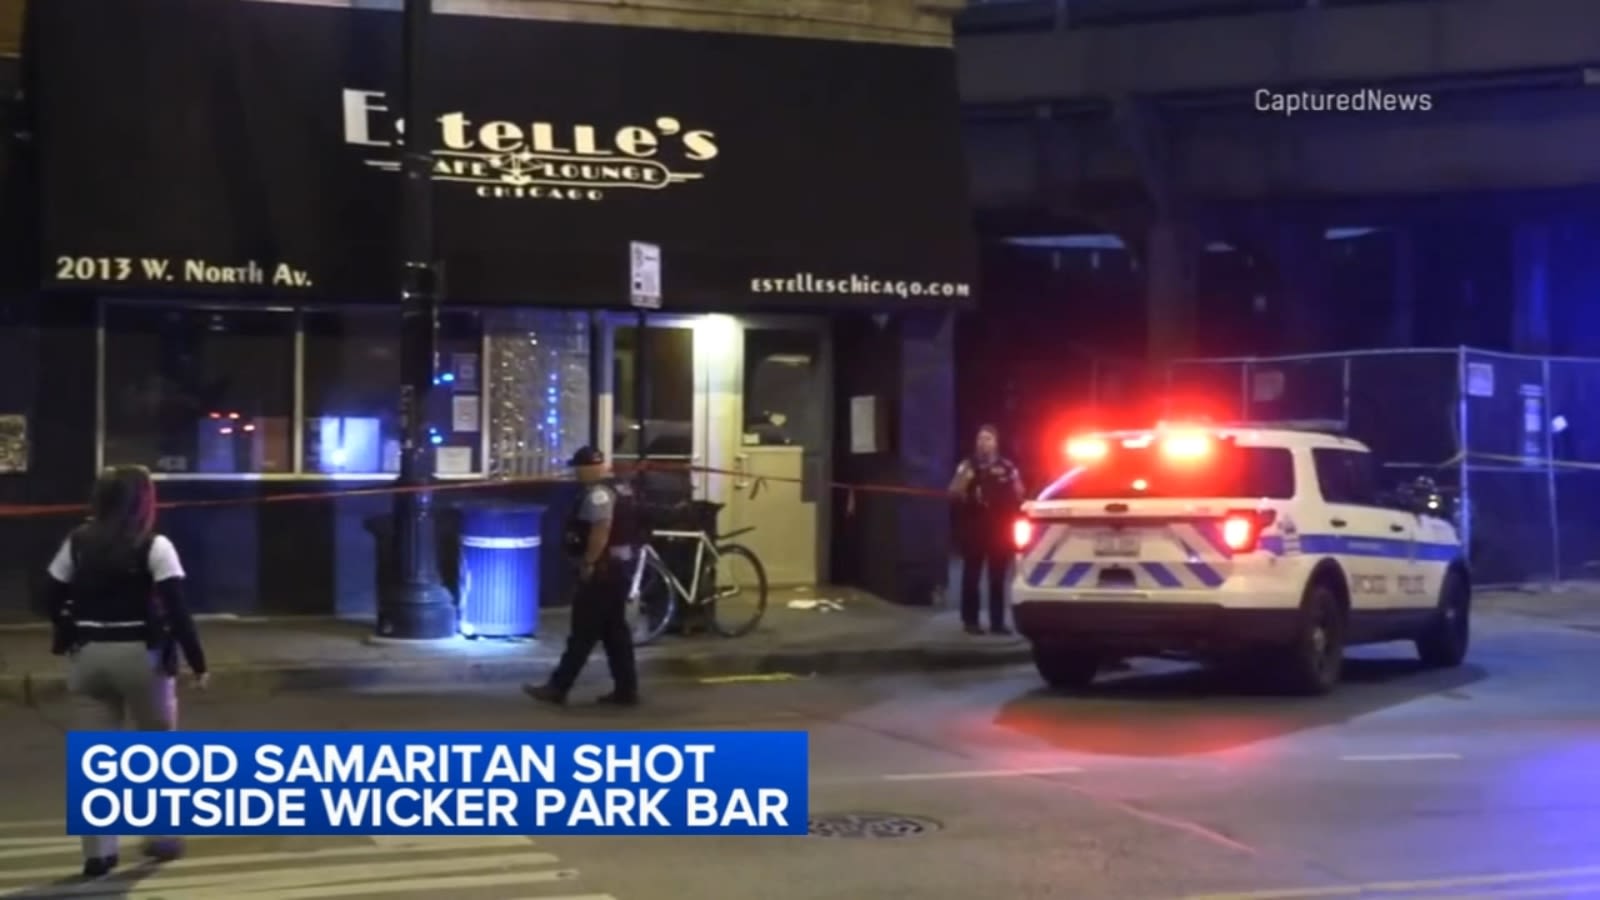 Man shot, critically injured trying to help Wicker Park robbery victims: Chicago police